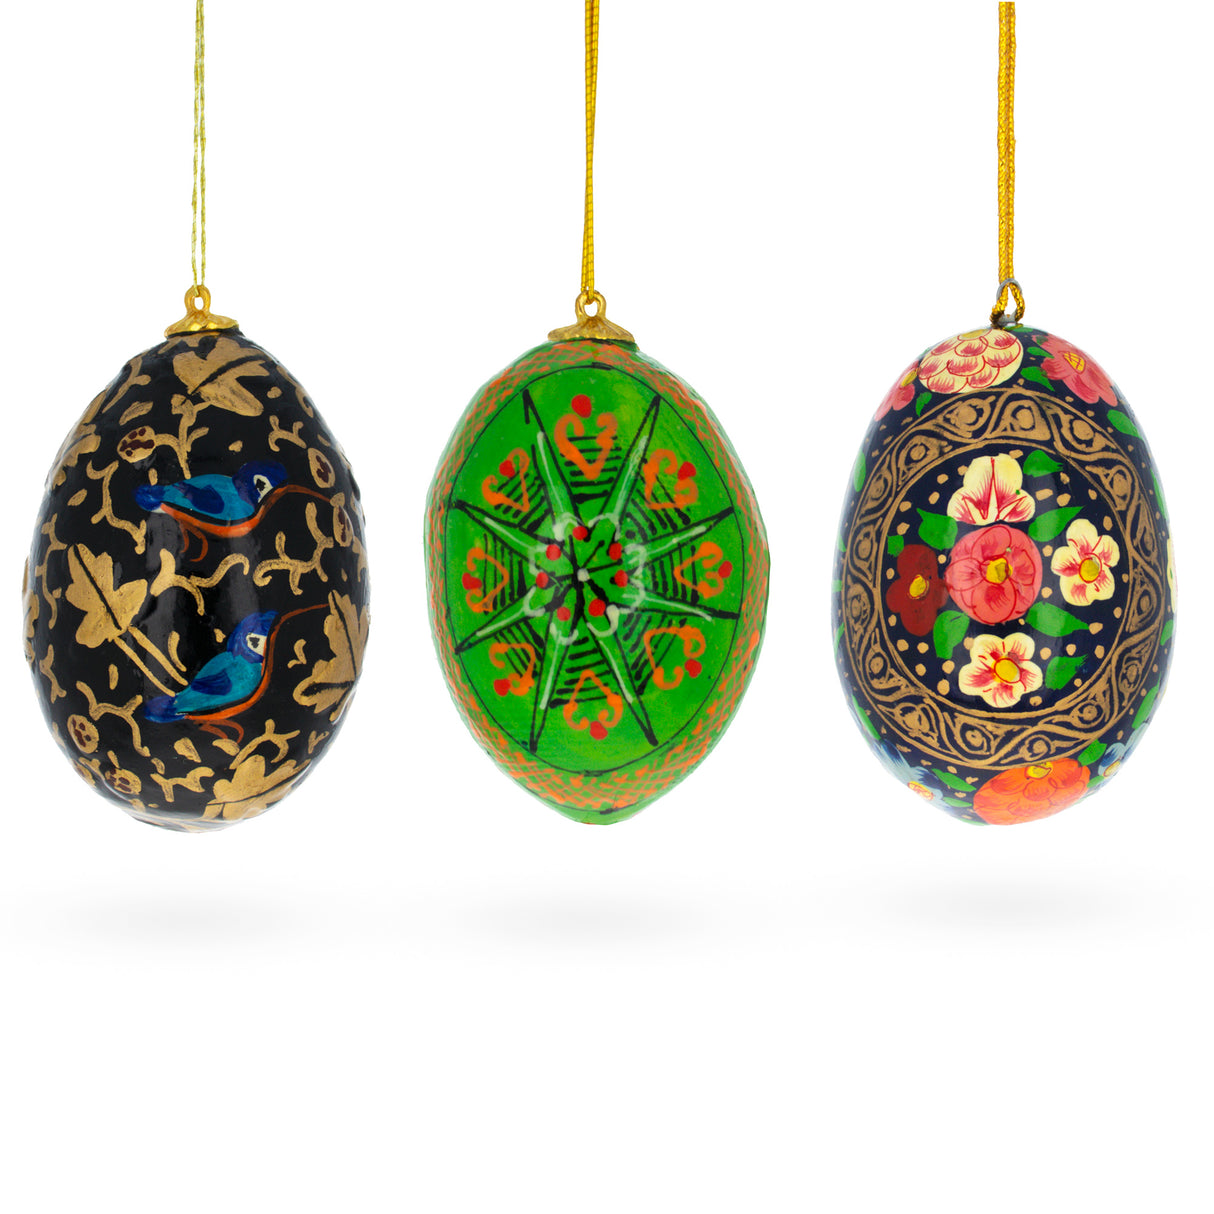 Set of 3 Flowers, Birds and Geometrical Wooden Easter Egg Christmas Ornaments 3 Inches in Multi color, Oval shape